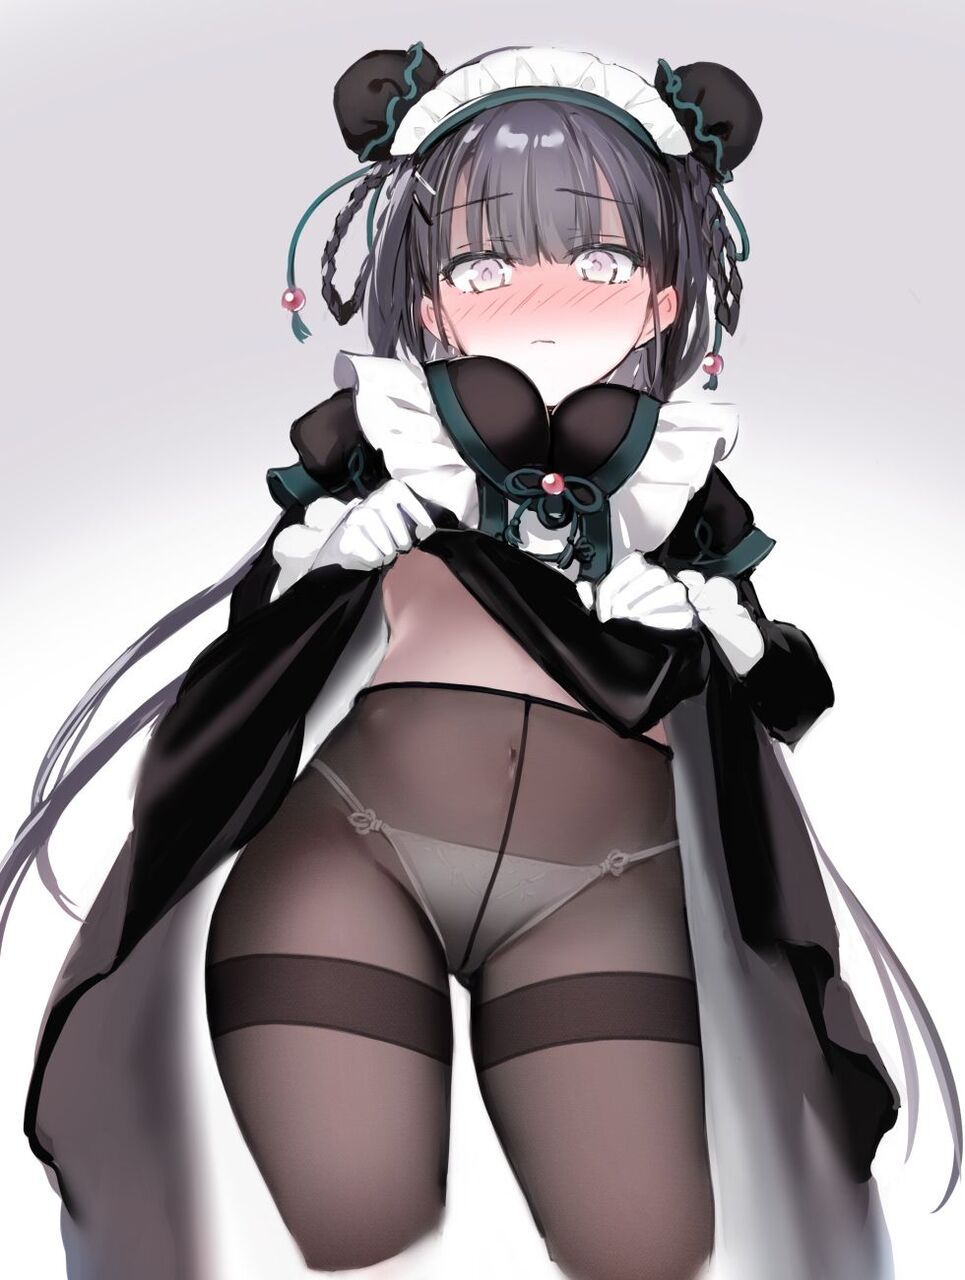 I did not wait for the erotic image of the maid! 8